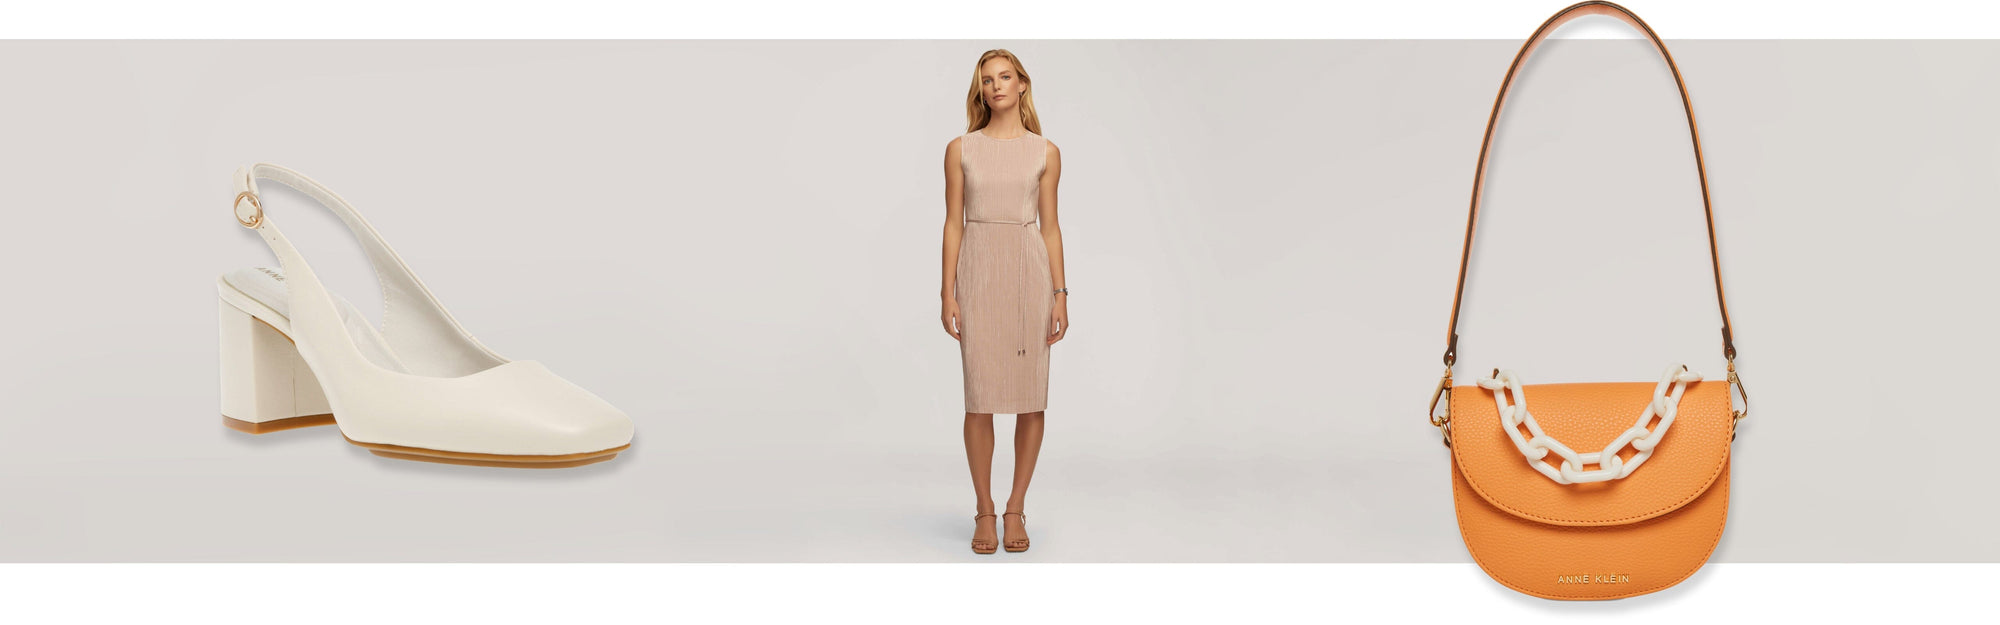 How to Style Spring Dresses For Women - Anne Klein